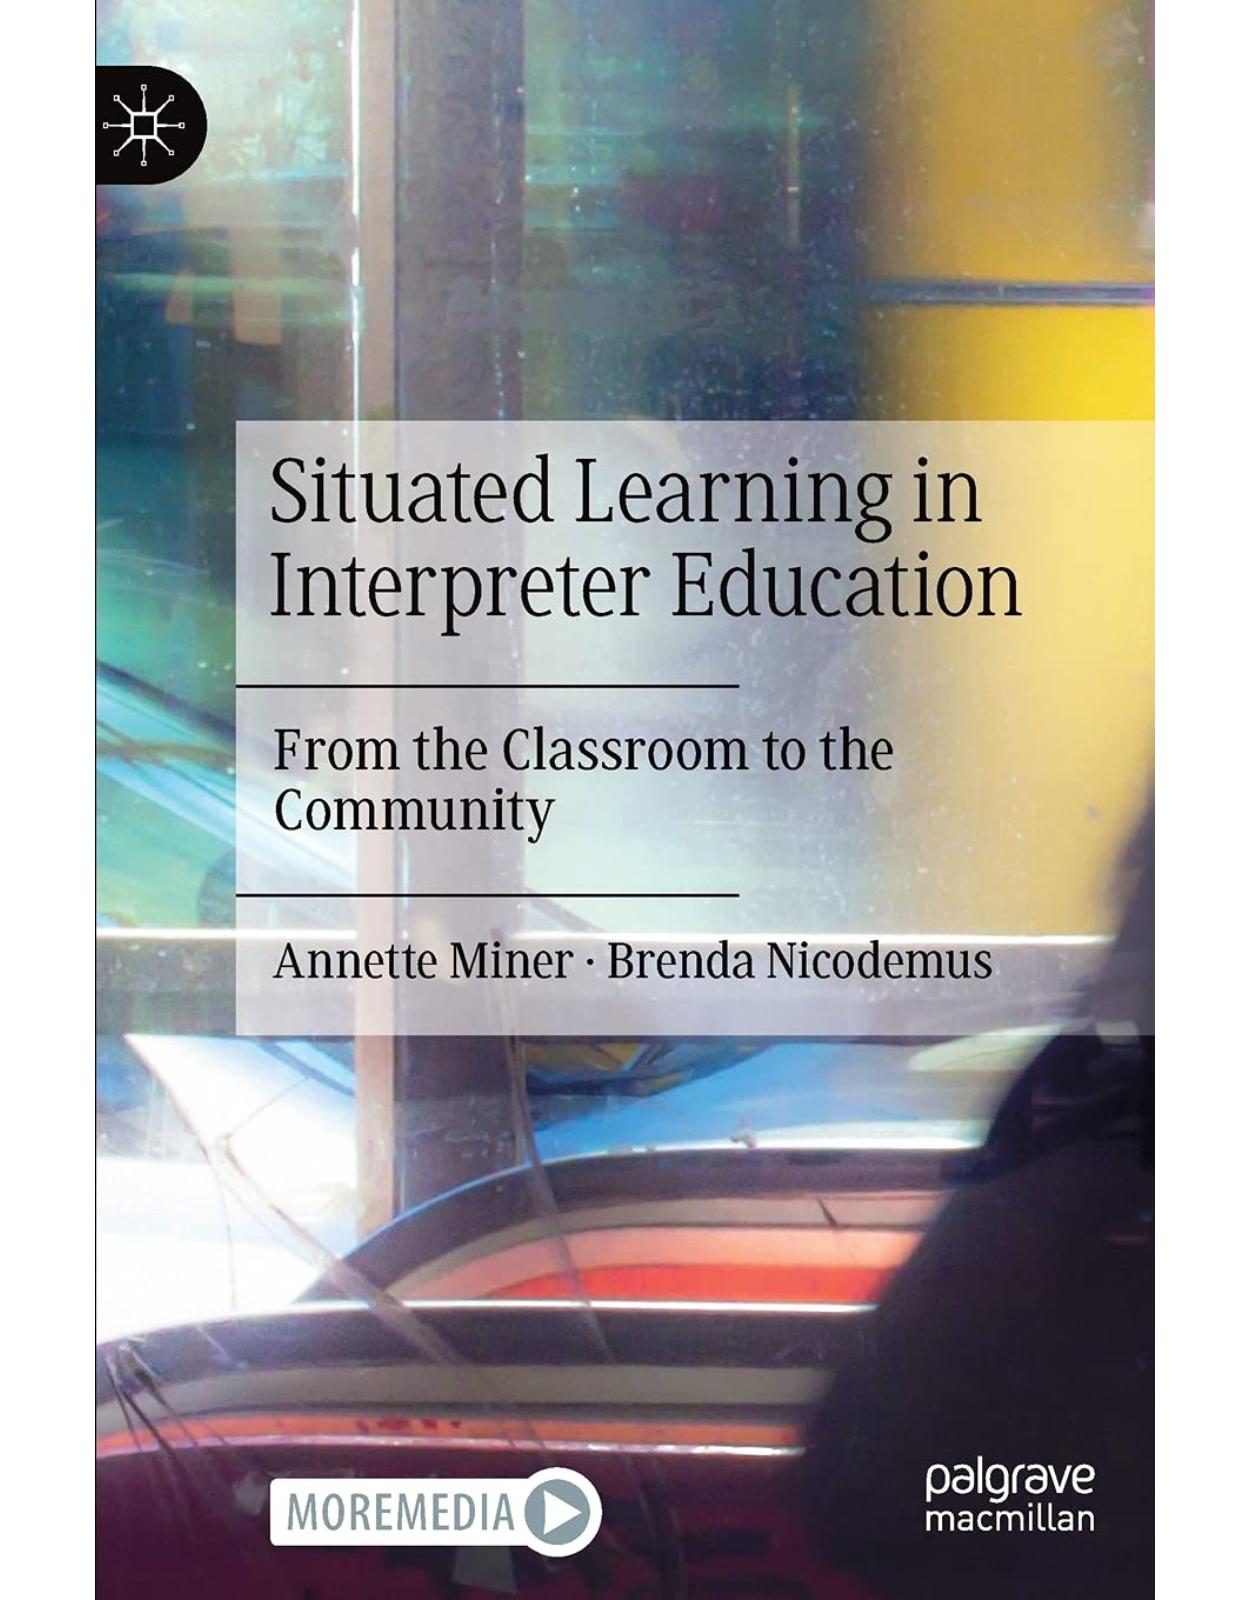 Situated Learning in Interpreter Education: From the Classroom to the Community